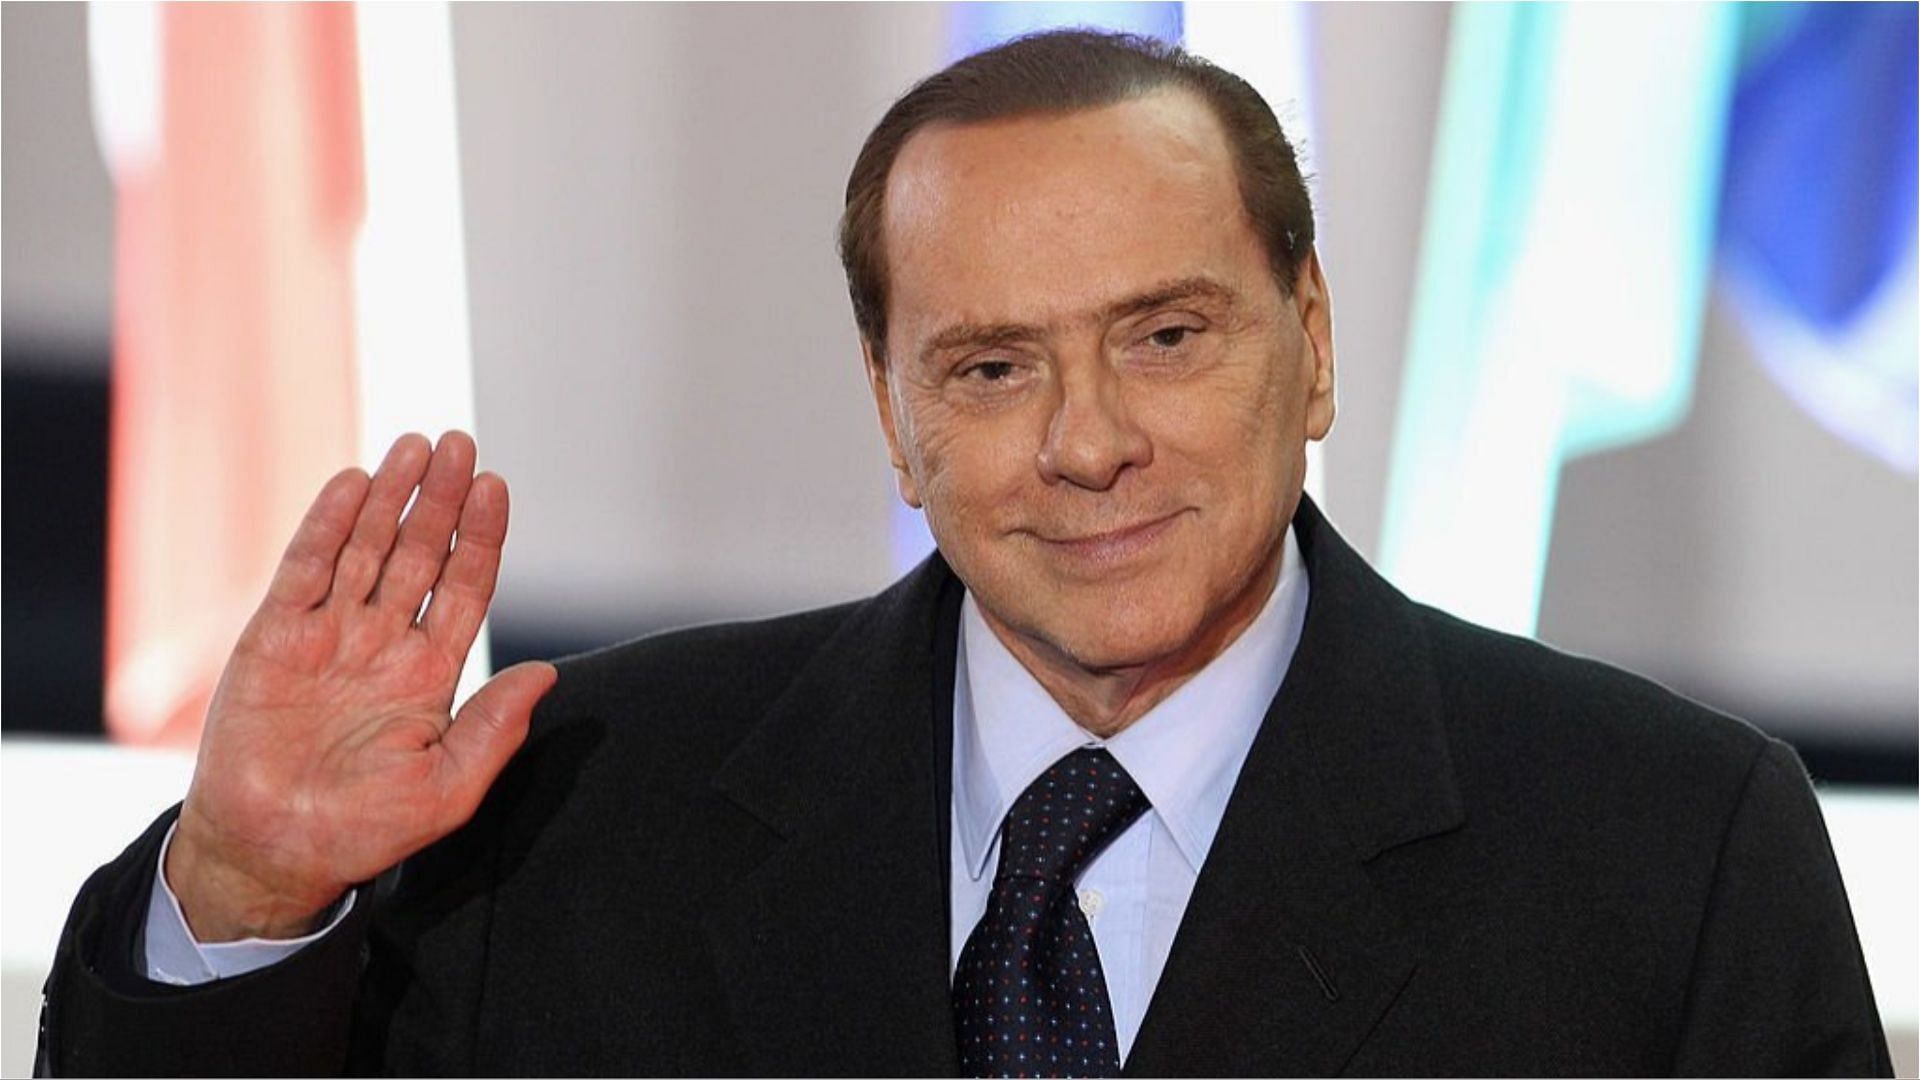 Silvio Berlusconi recently passed away at the age of 86 (Image via Dan Kitwood/Getty Images)